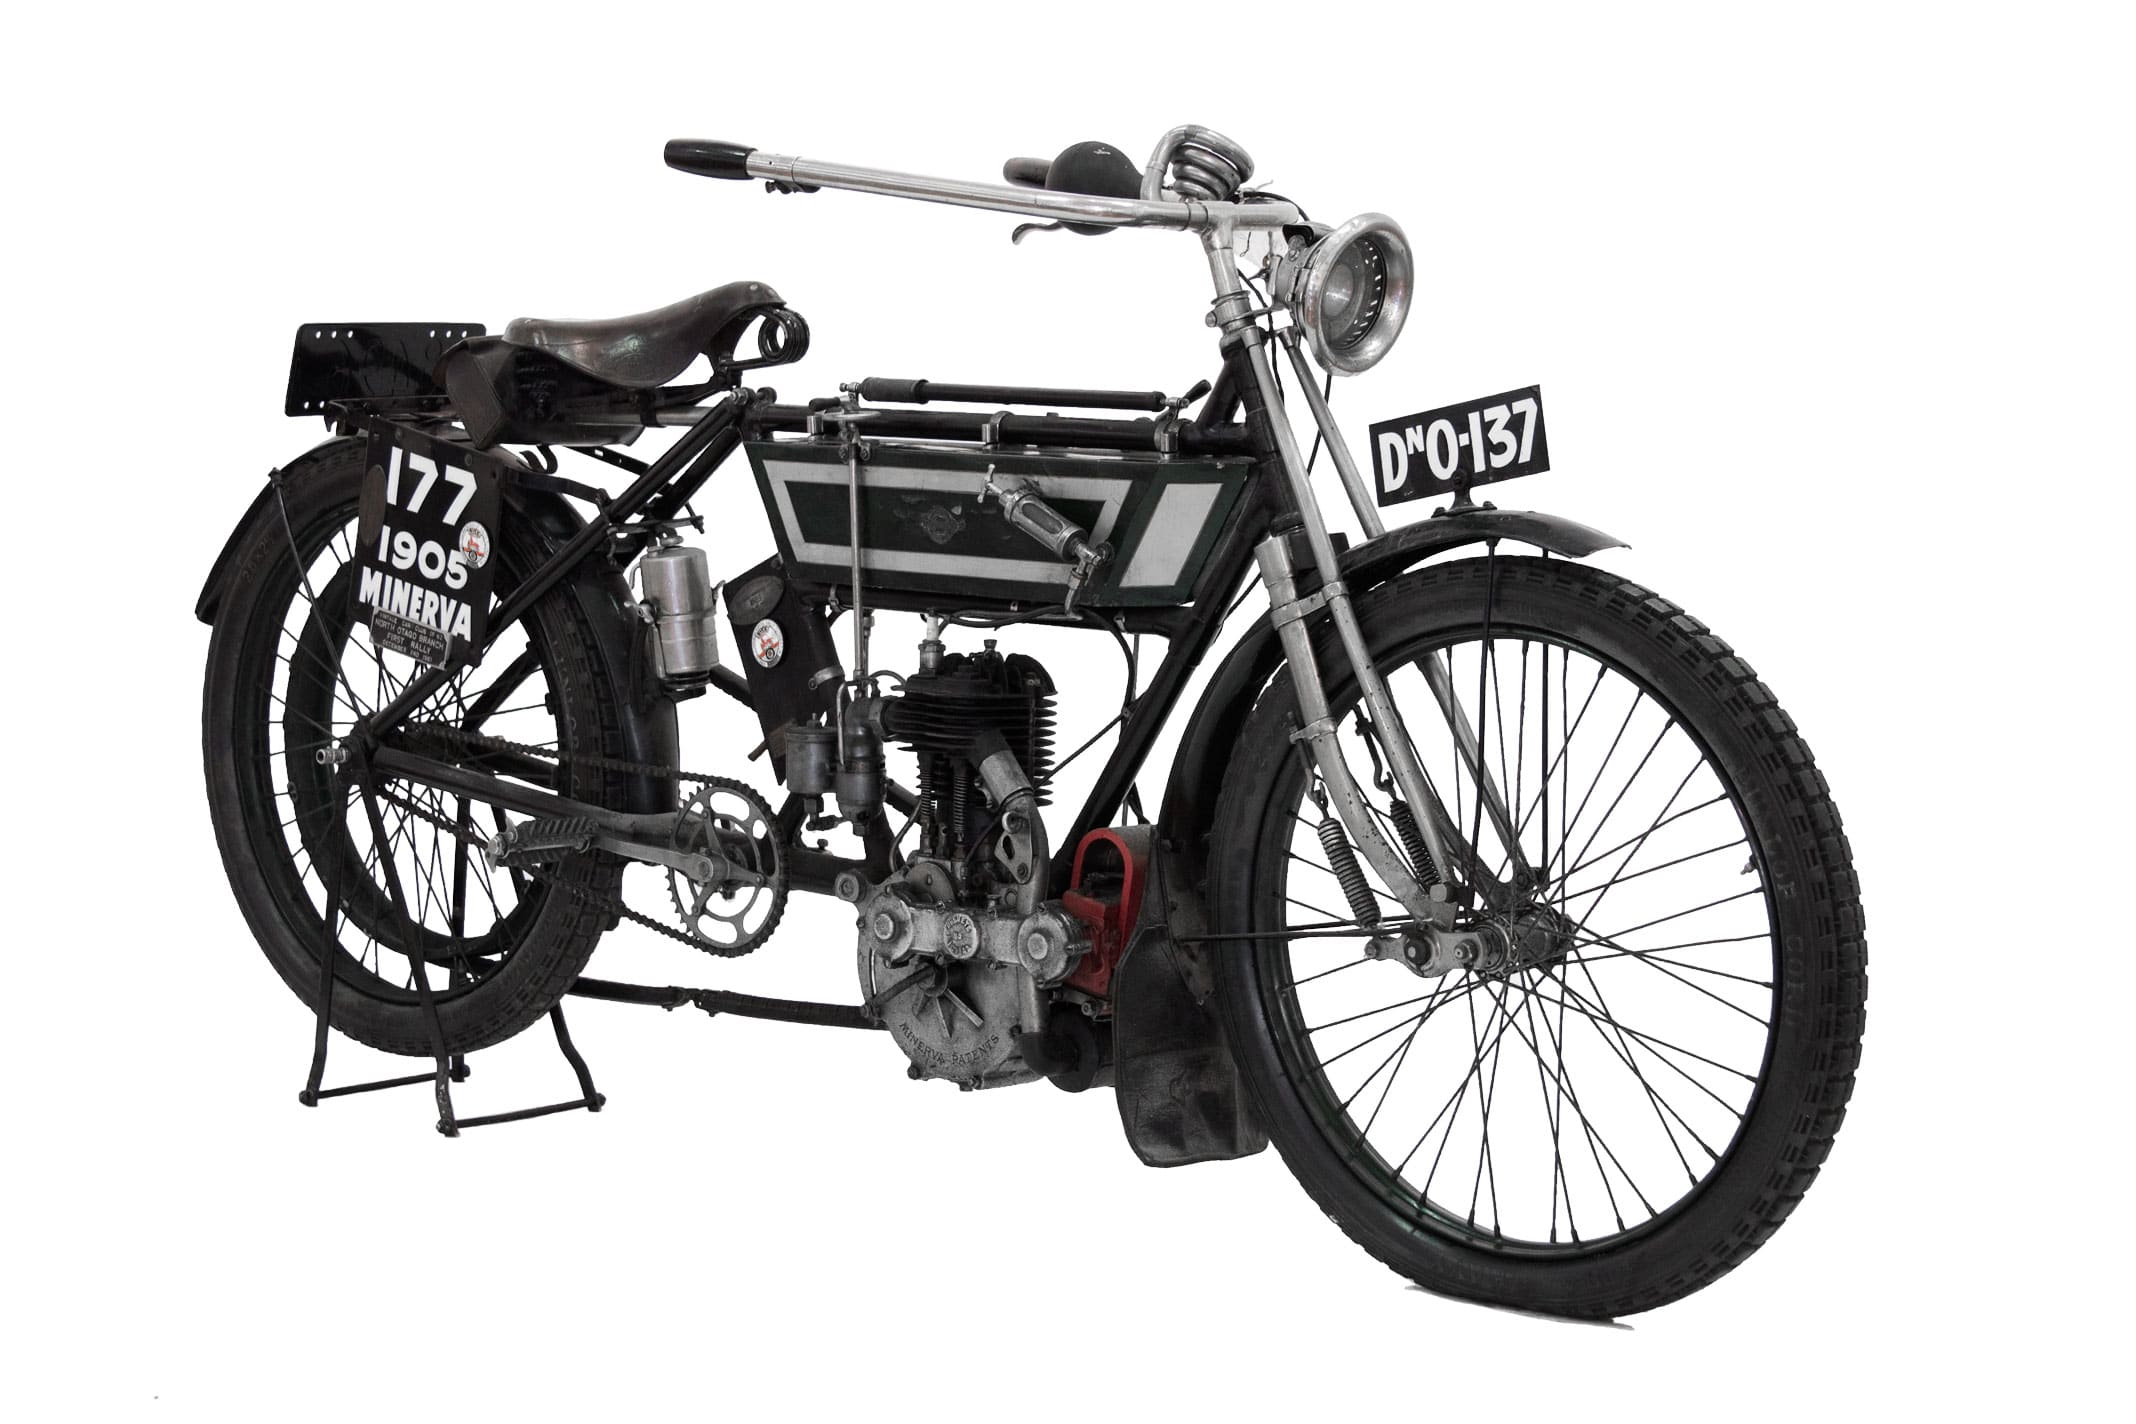 first commercial motorcycle